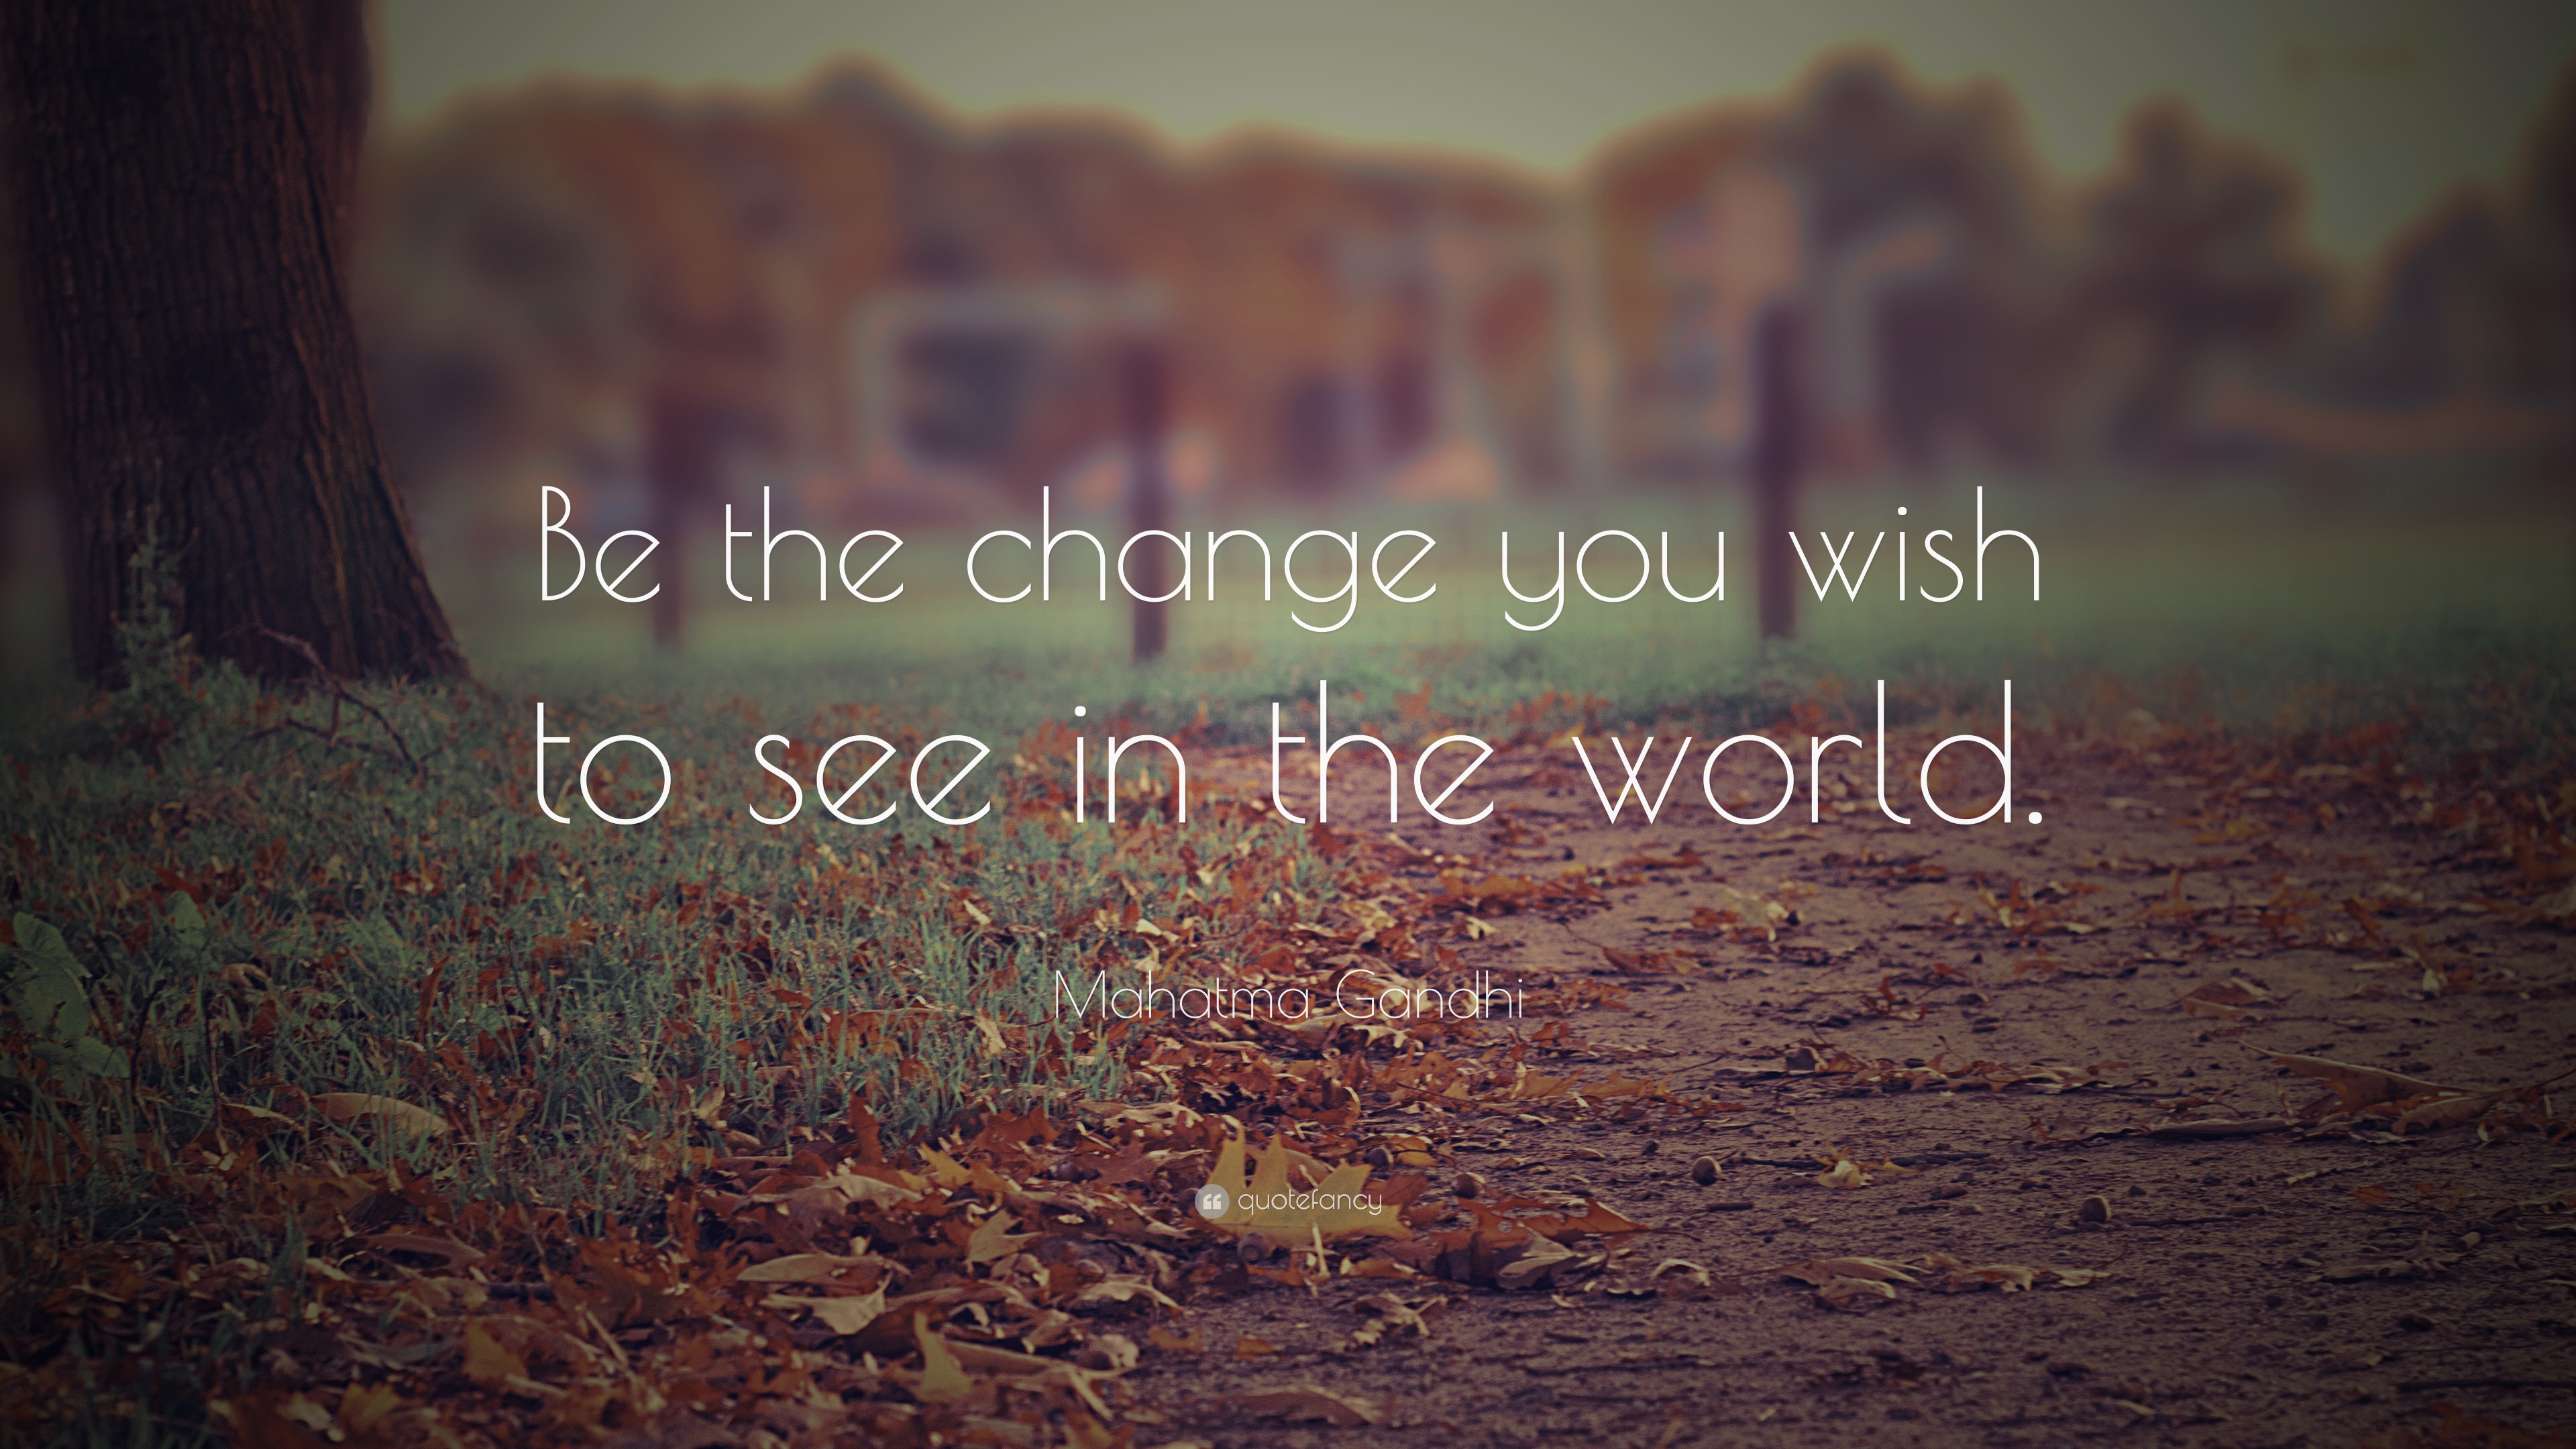 1301-Mahatma-Gandhi-Quote-Be-the-change-you-wish-to-see-in-the-world.jpg